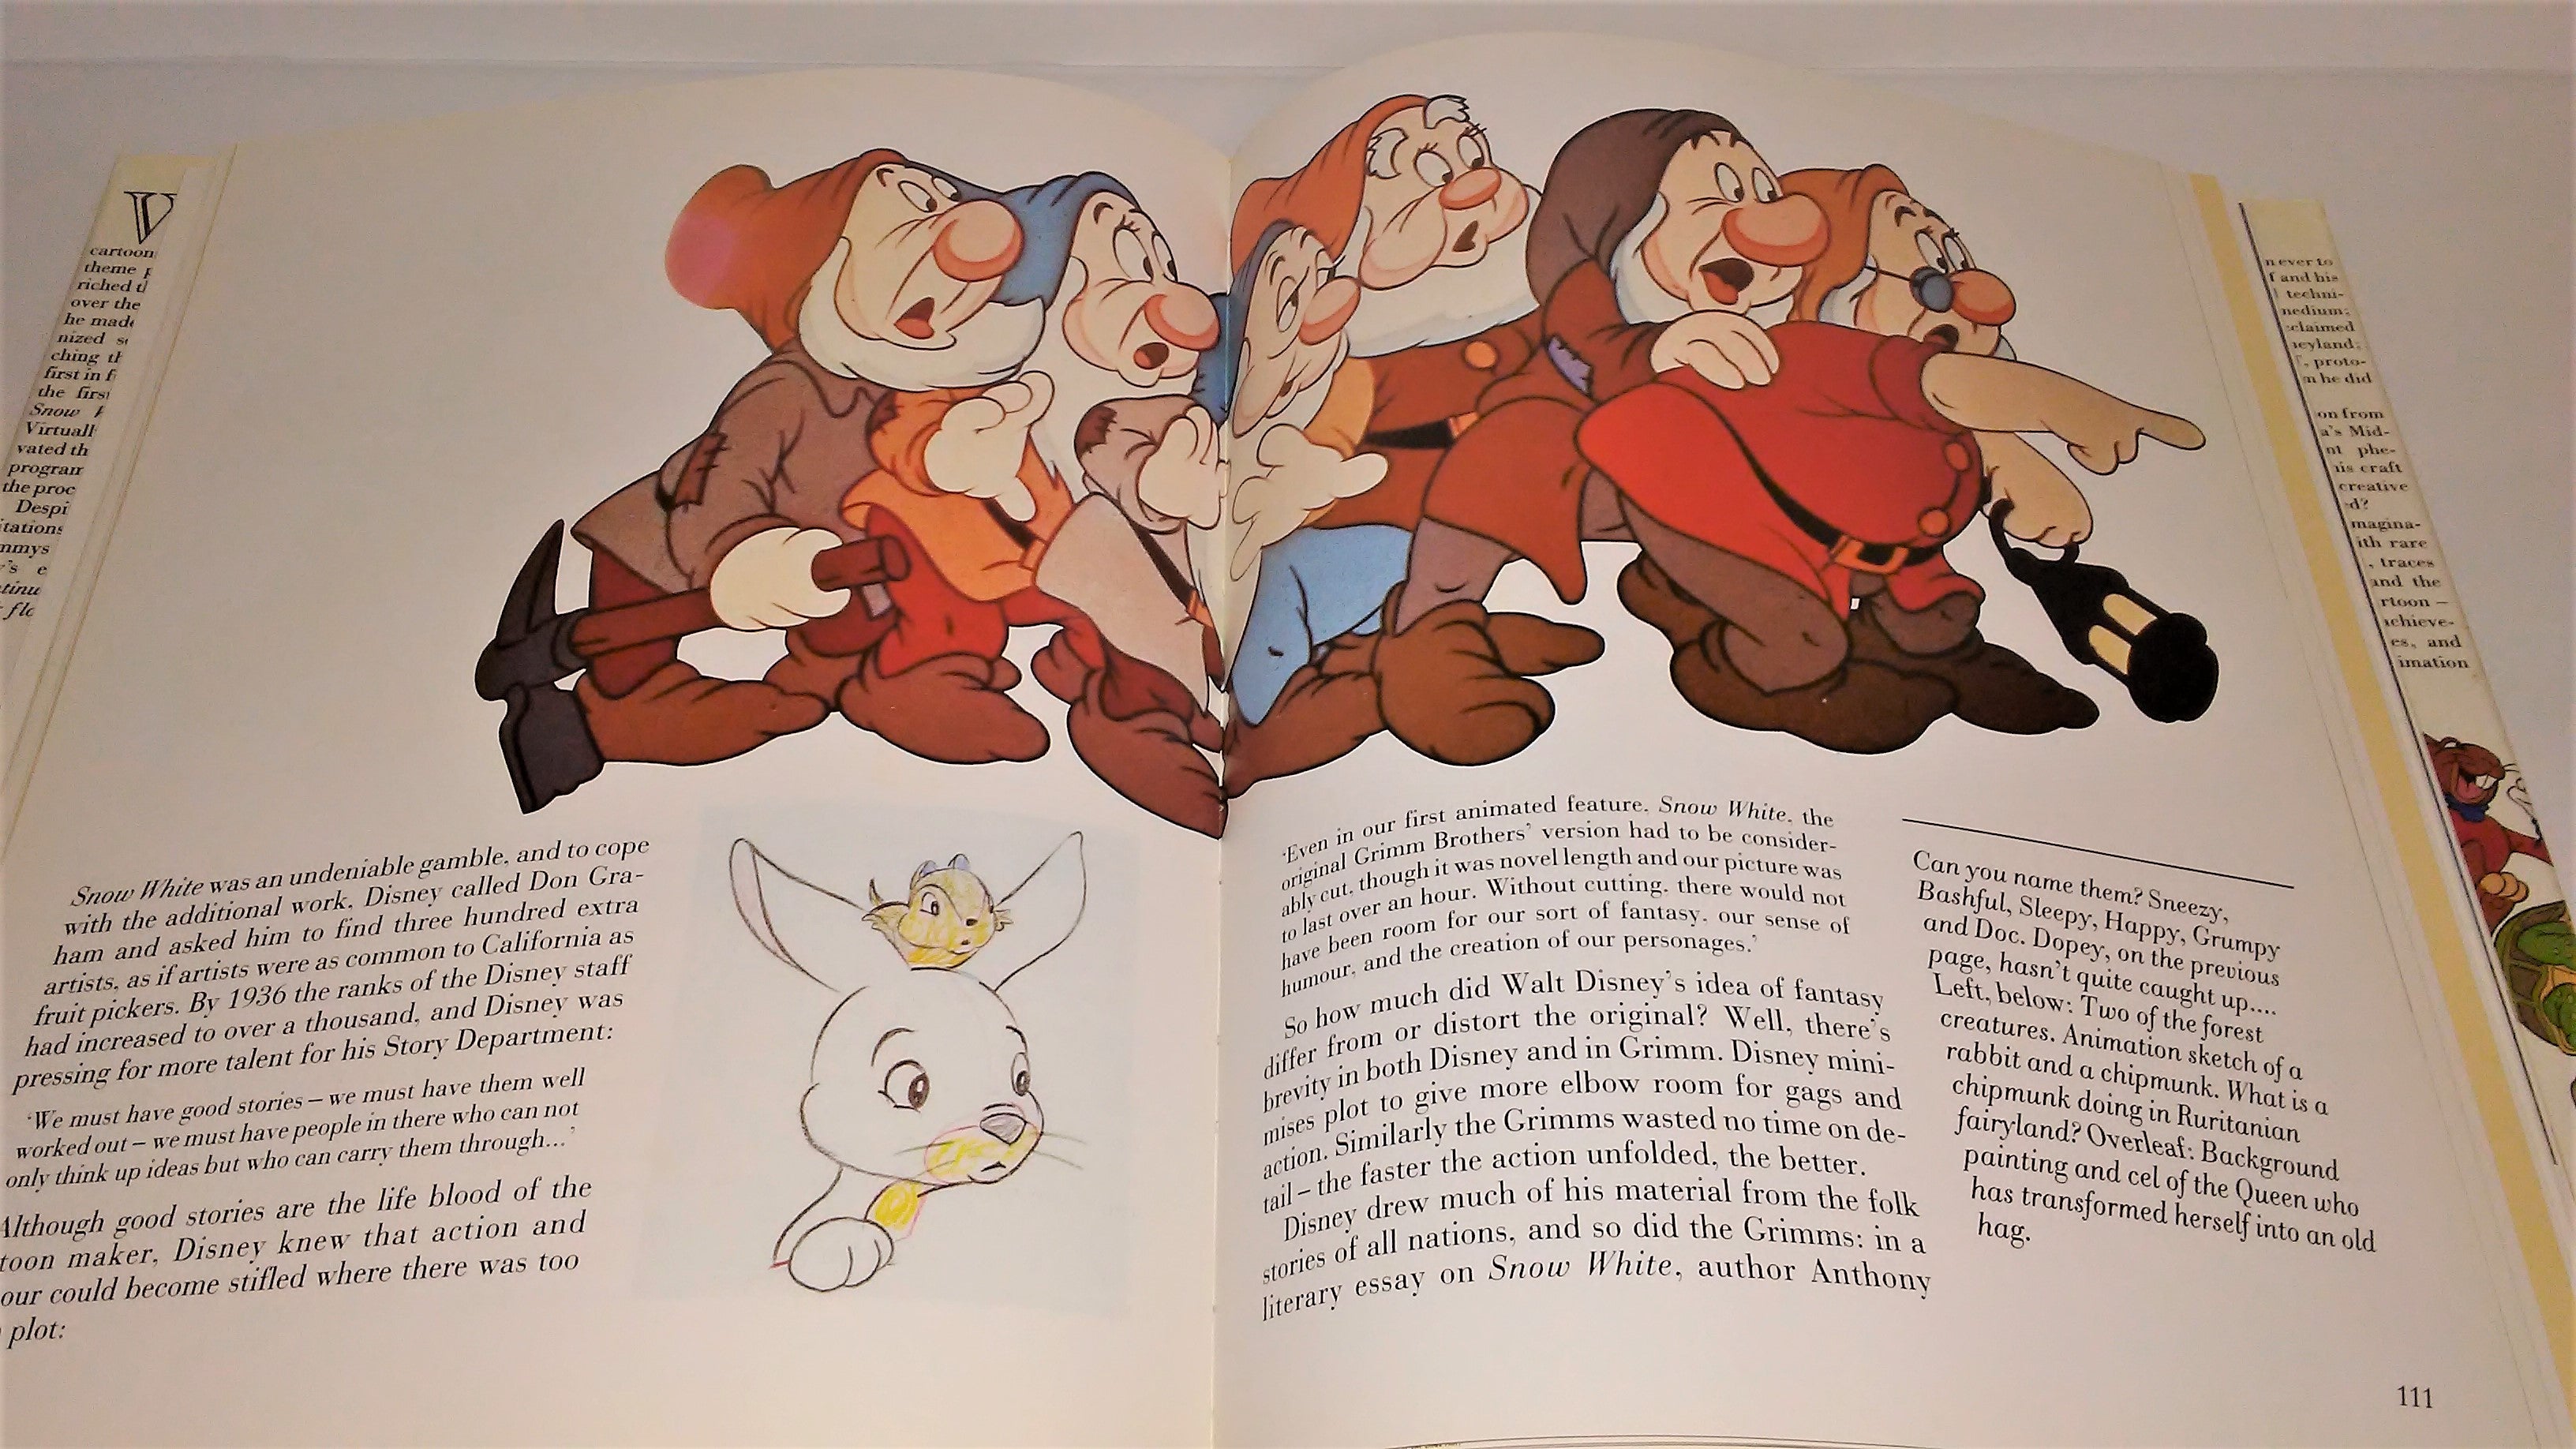 Walt Disney's World of Fantasy book by Adrian Bailey from 1987 Hardcover  Printed in Spain